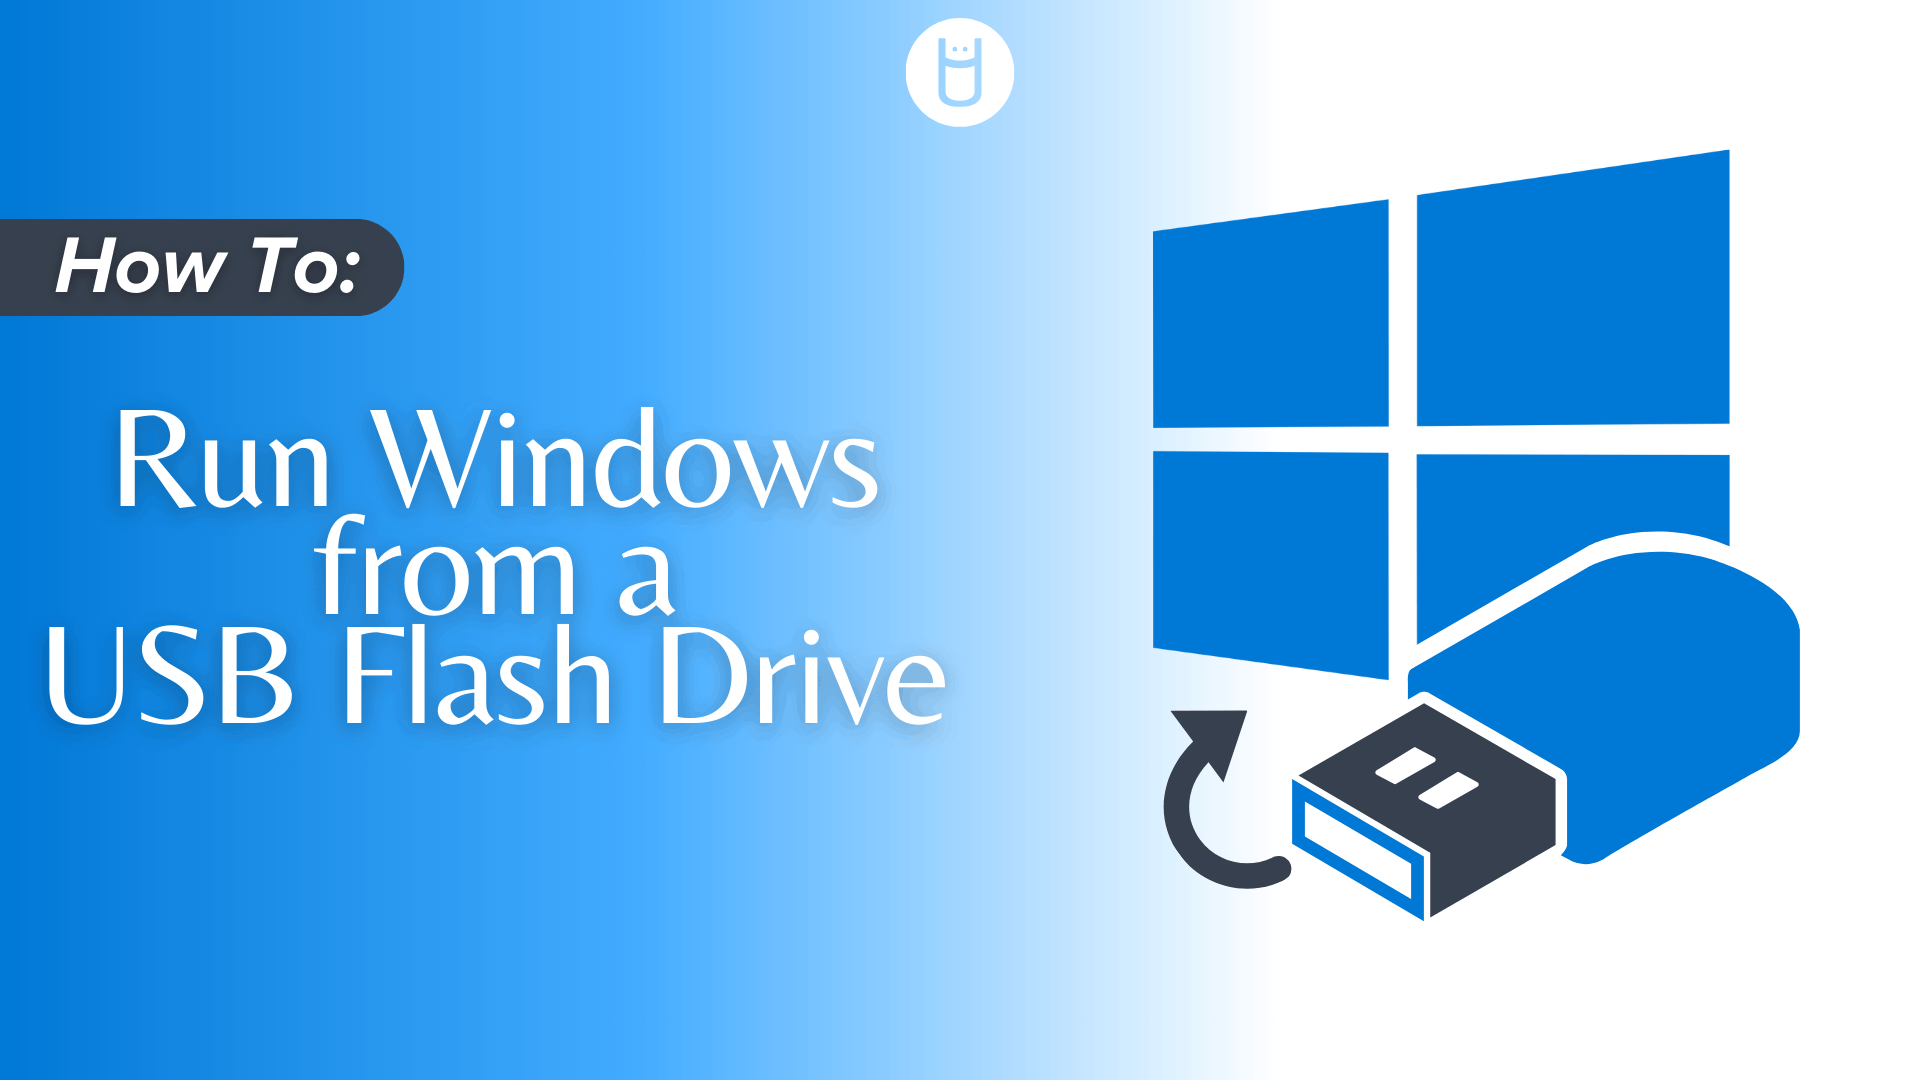 How to run windows from a USB flash drive - USB Memory Direct